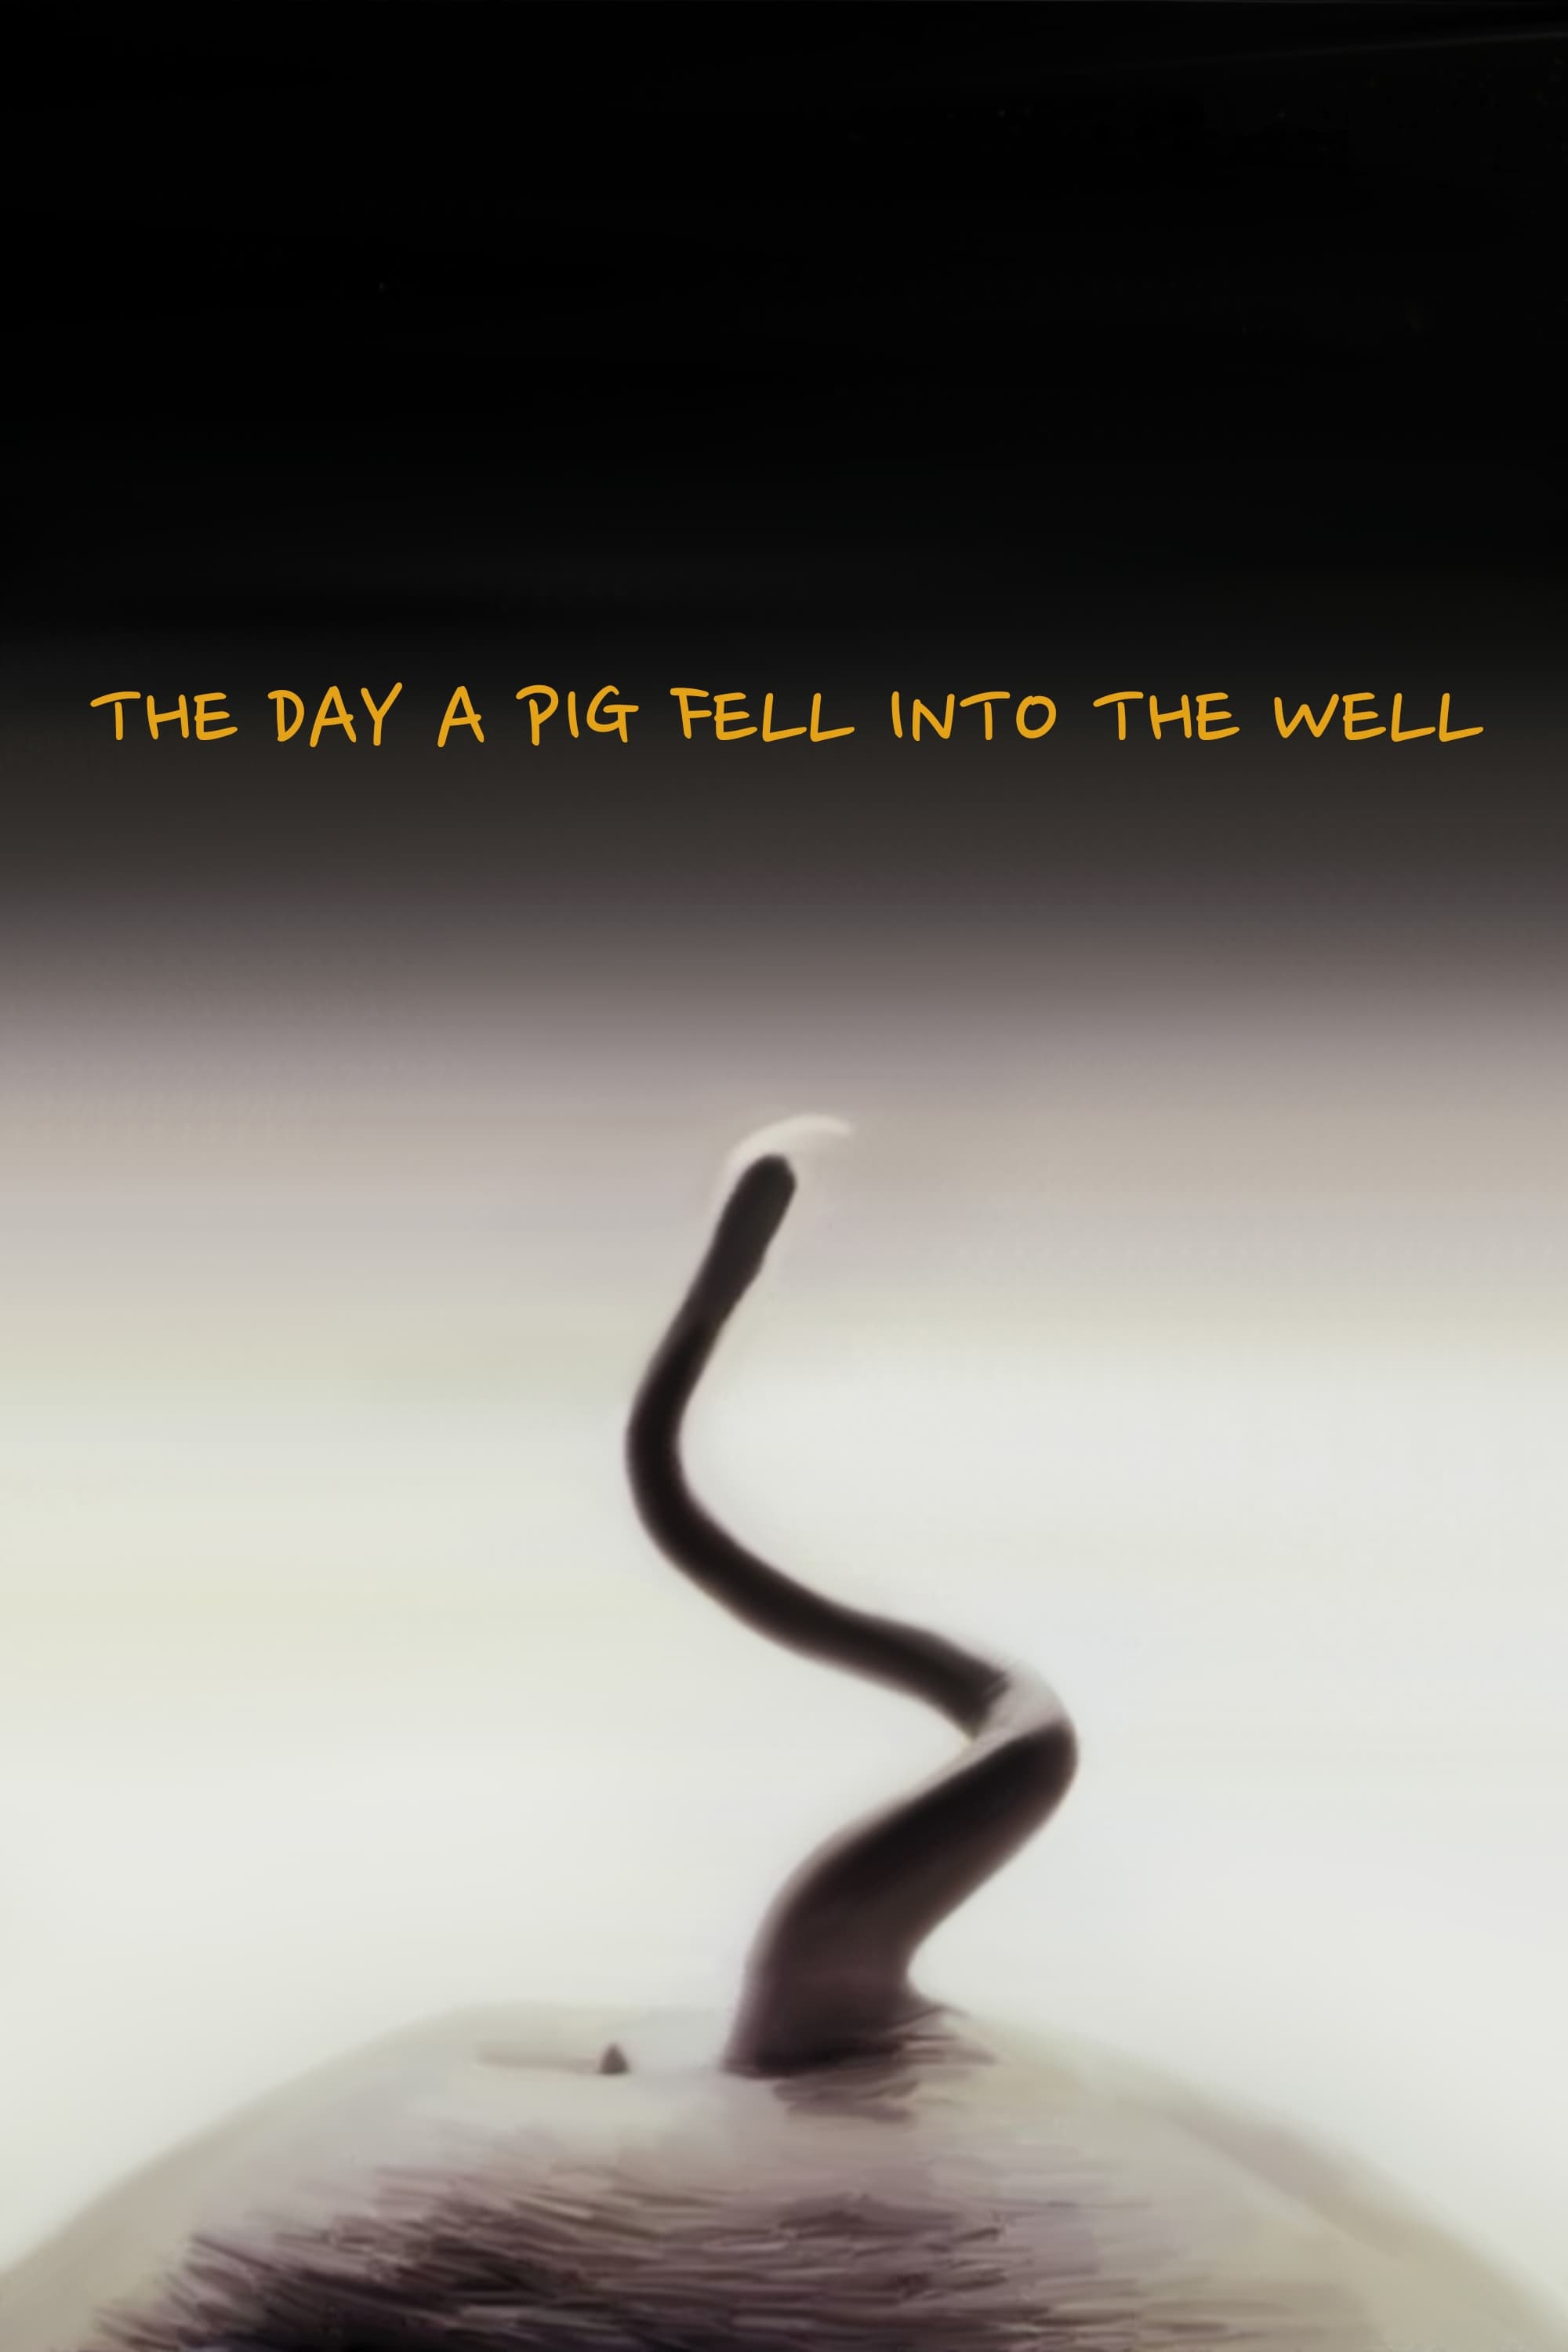 The Day a Pig Fell Into the Well (1996)